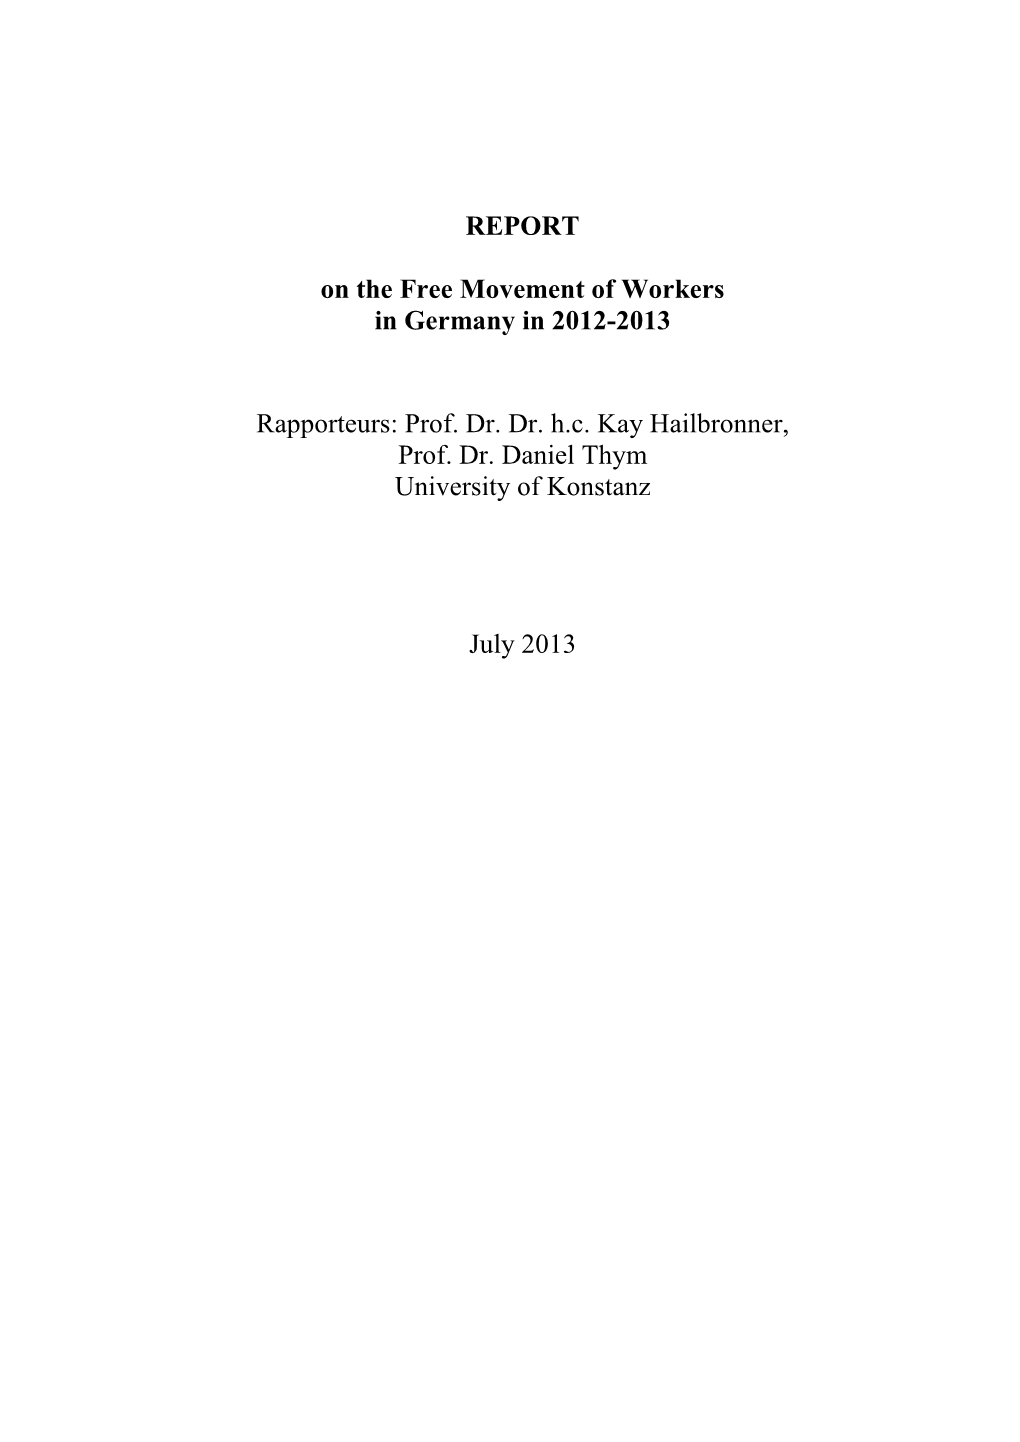 REPORT on the Free Movement of Workers in Germany in 2012